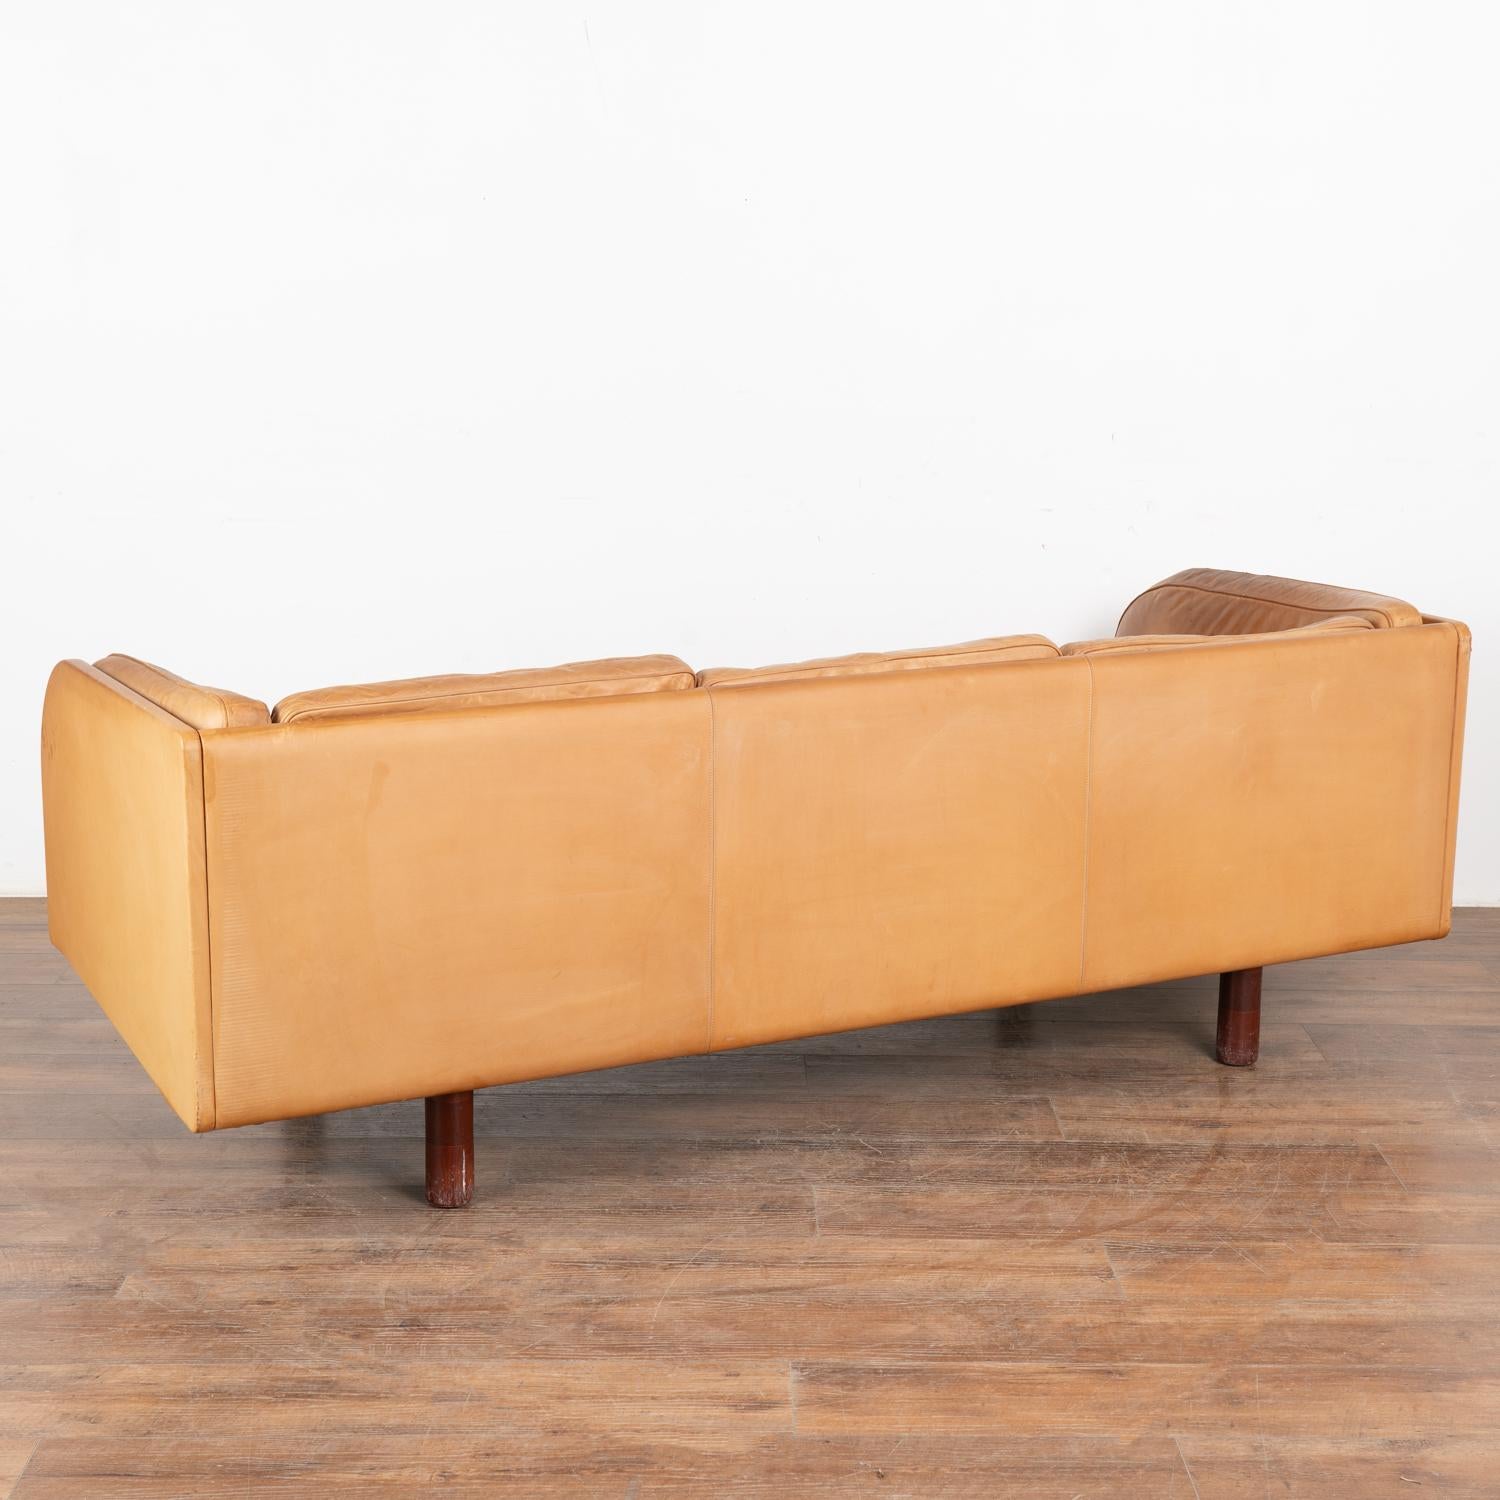 Mid Century Modern Three Seat Sofa With Curved Arms, Denmark circa 1960 For Sale 2